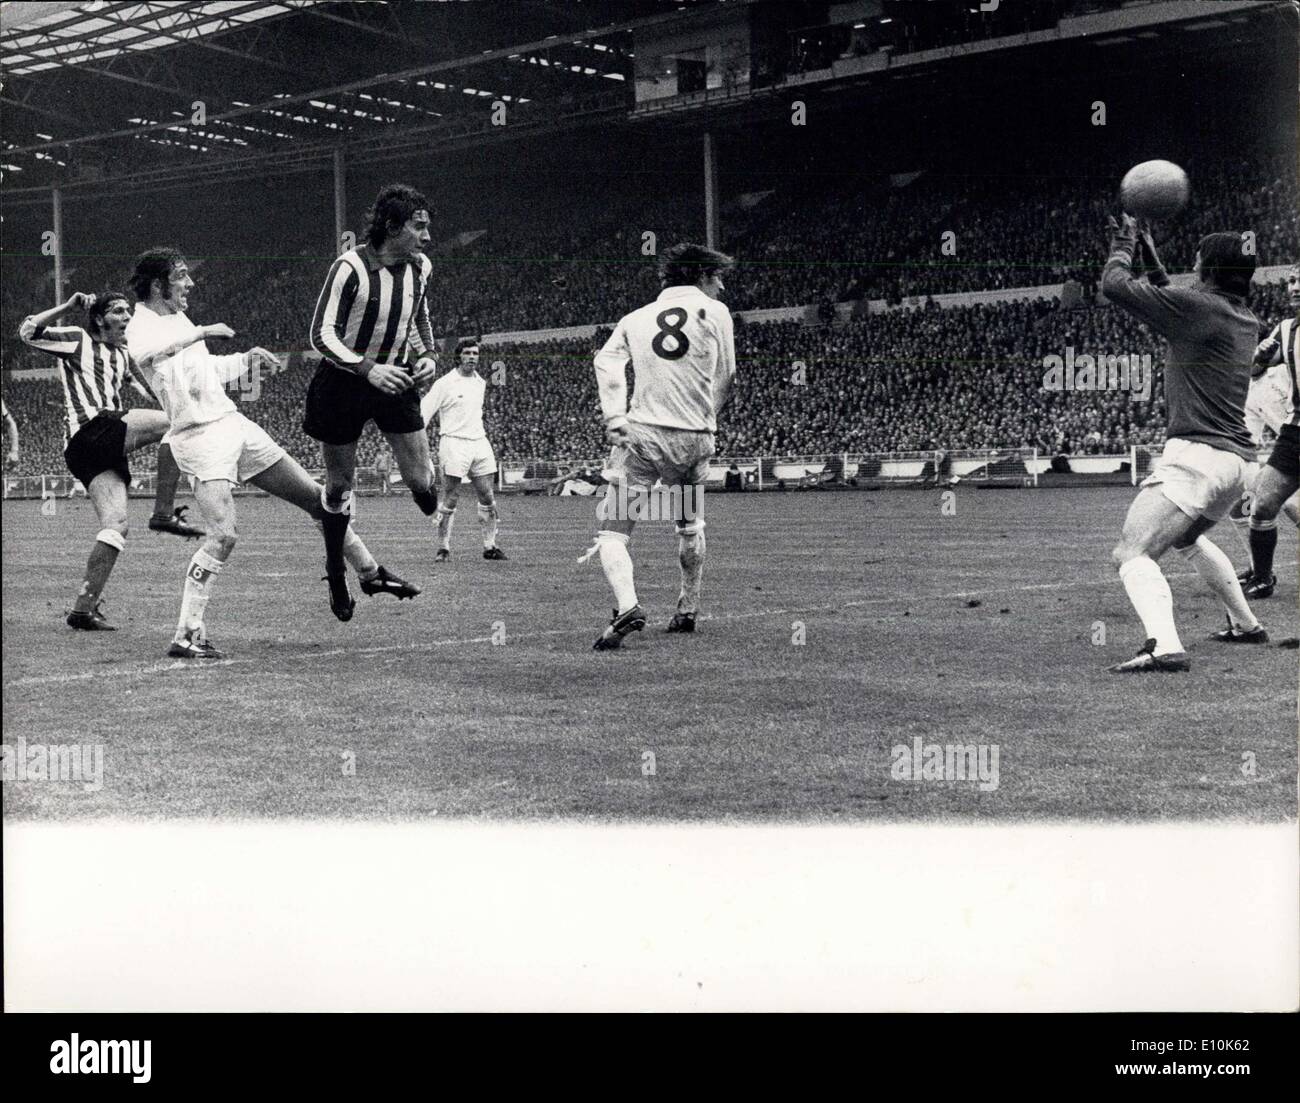 May 05, 1973 - Sunderland Beat Leeds 1-8 Ina the FA Cup Final at Wembley - Sunderland Became the first Second Division Team to Win the FA Cup Since 1931 When they Beat First Division Leeds United By 1-0 at Wmbley this Afternoon. Photo Shows - Tjird from Left Porterfield the Suinderland inside forward beats the Leeds Goalie D. Harvey to Score the Winninn Goal Flanked by Hunter the Leeds WIng-Half and Clarke the Leeds at Wembley Today. Stock Photo